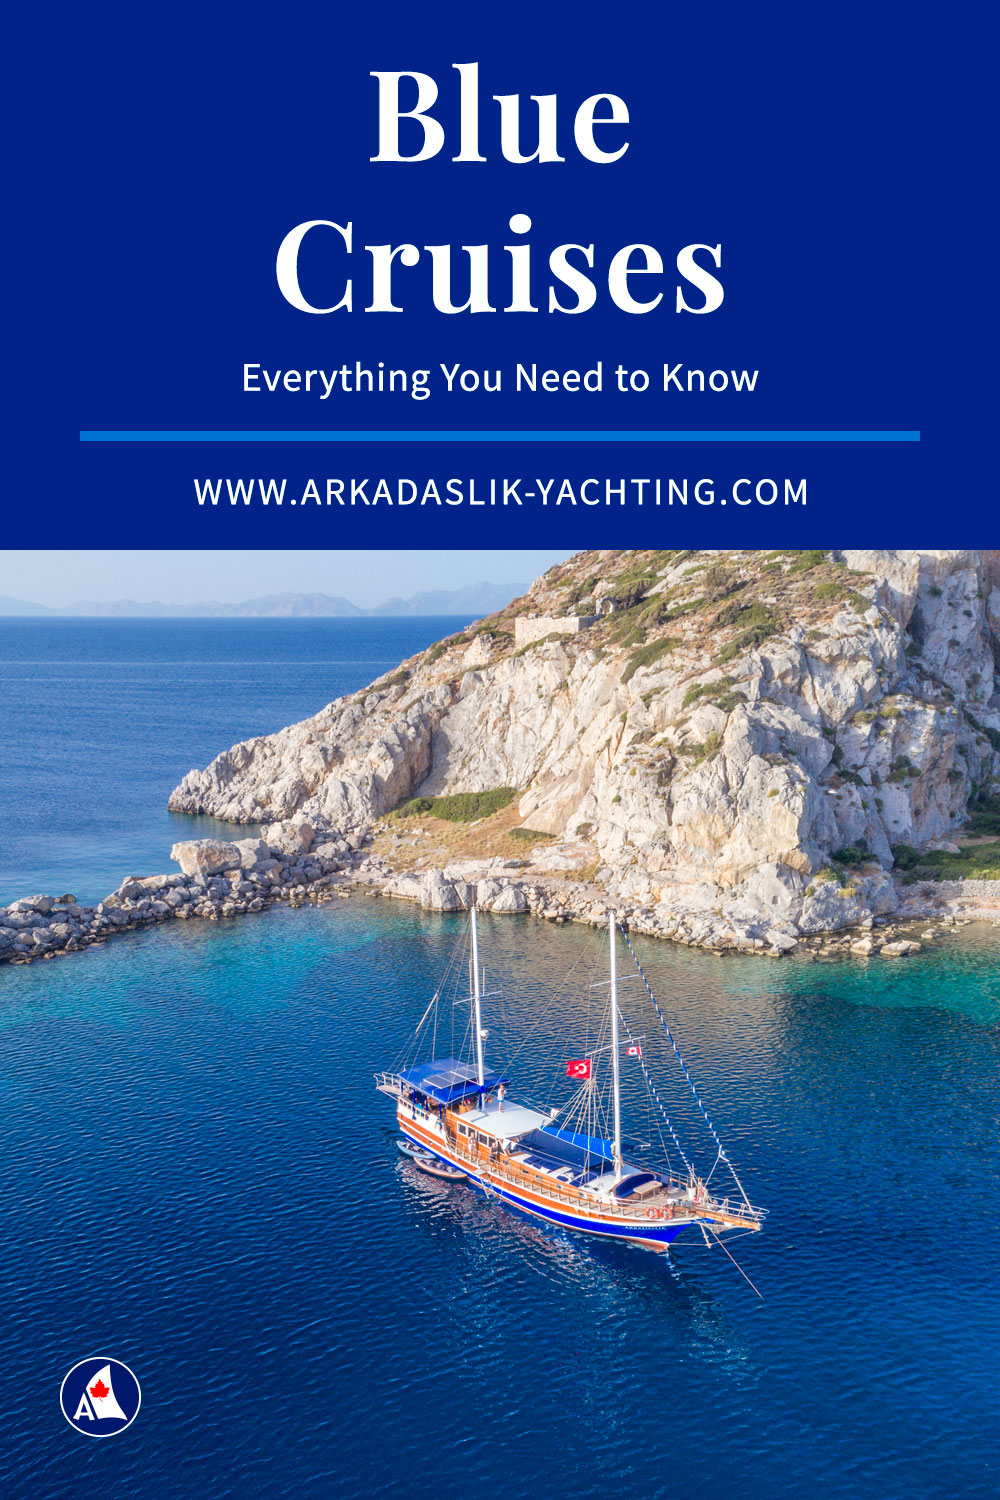 The Blue Cruise Guide: An Insider's Look at Gulets and Blue Cruises in ...